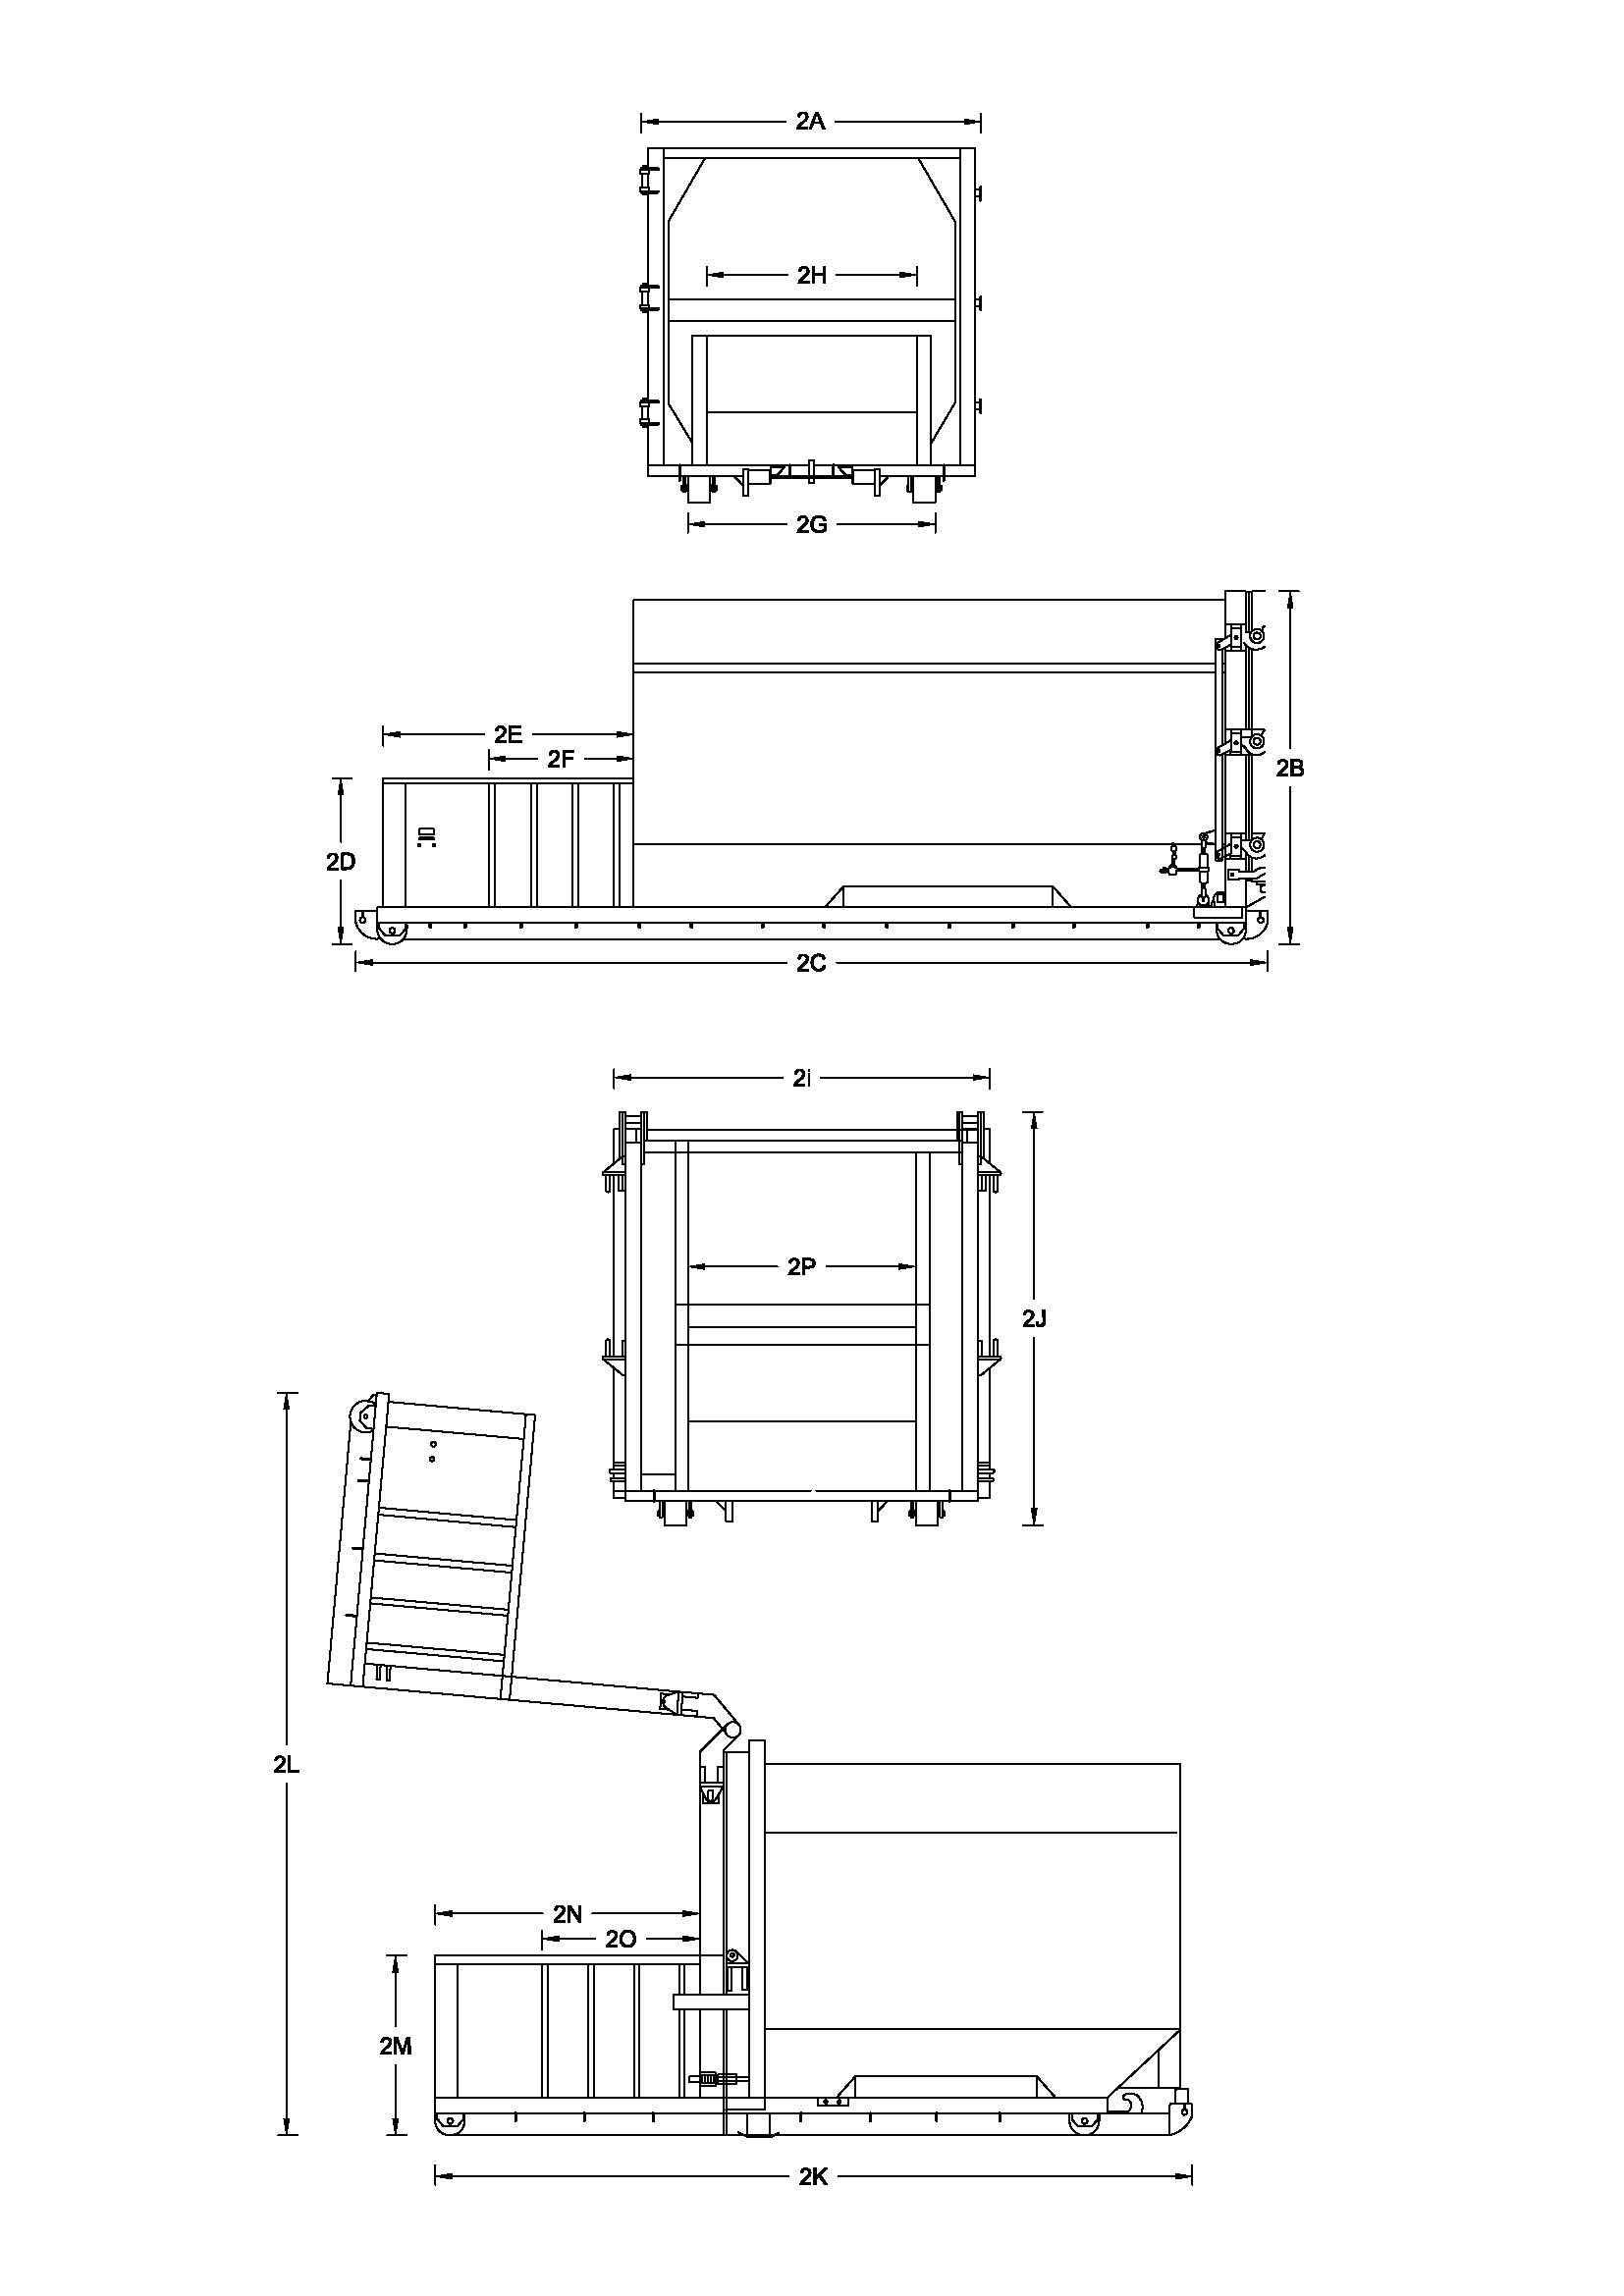 34 Yard Self Contained Compactor Diagram - 2 Yd Charge Box